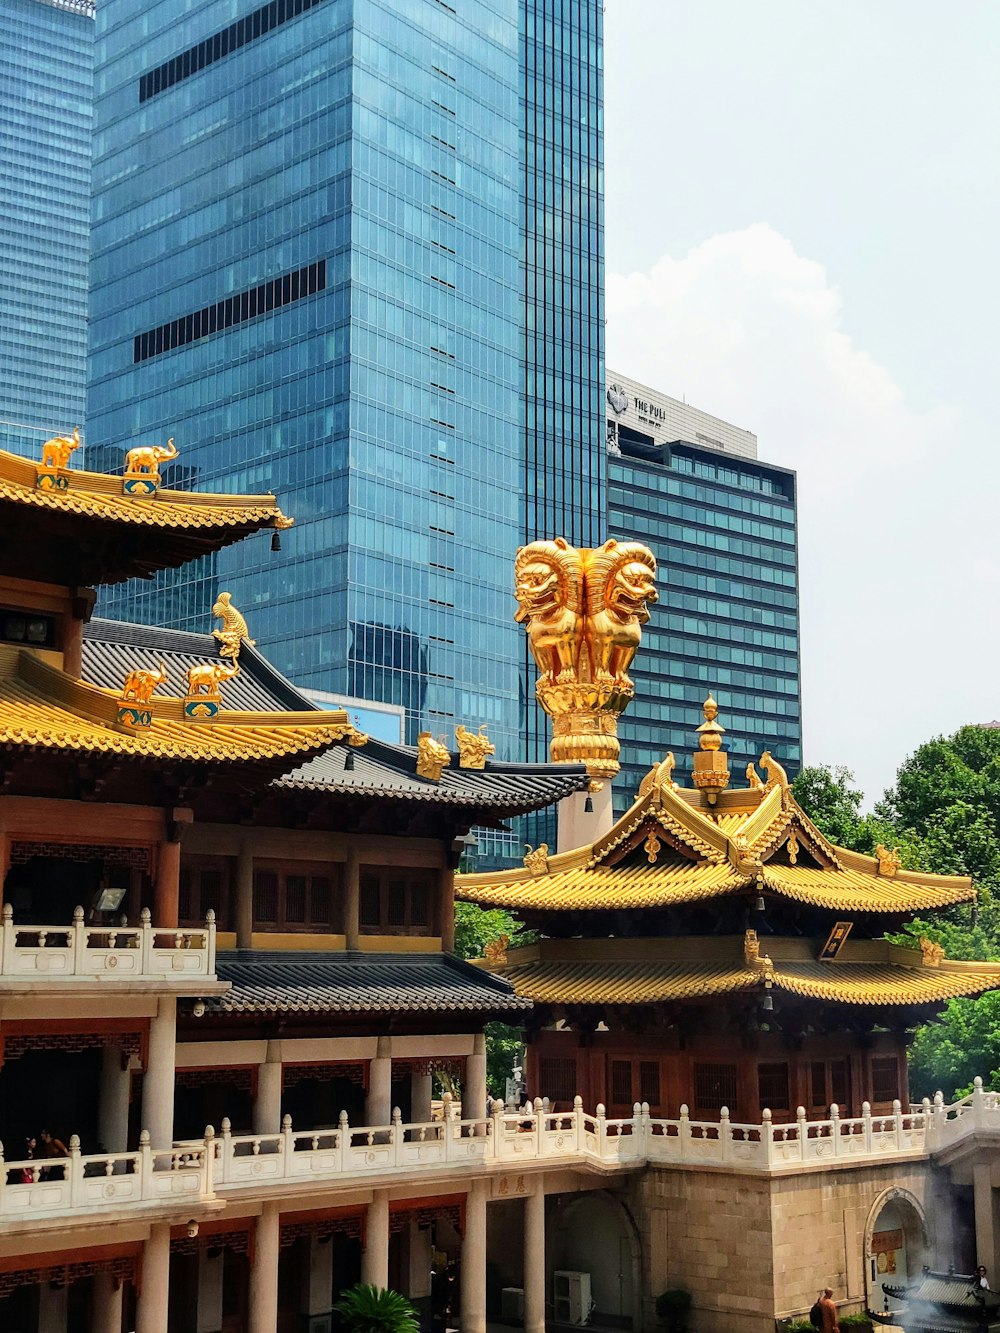 yellow and black temple at daytime close-up photography